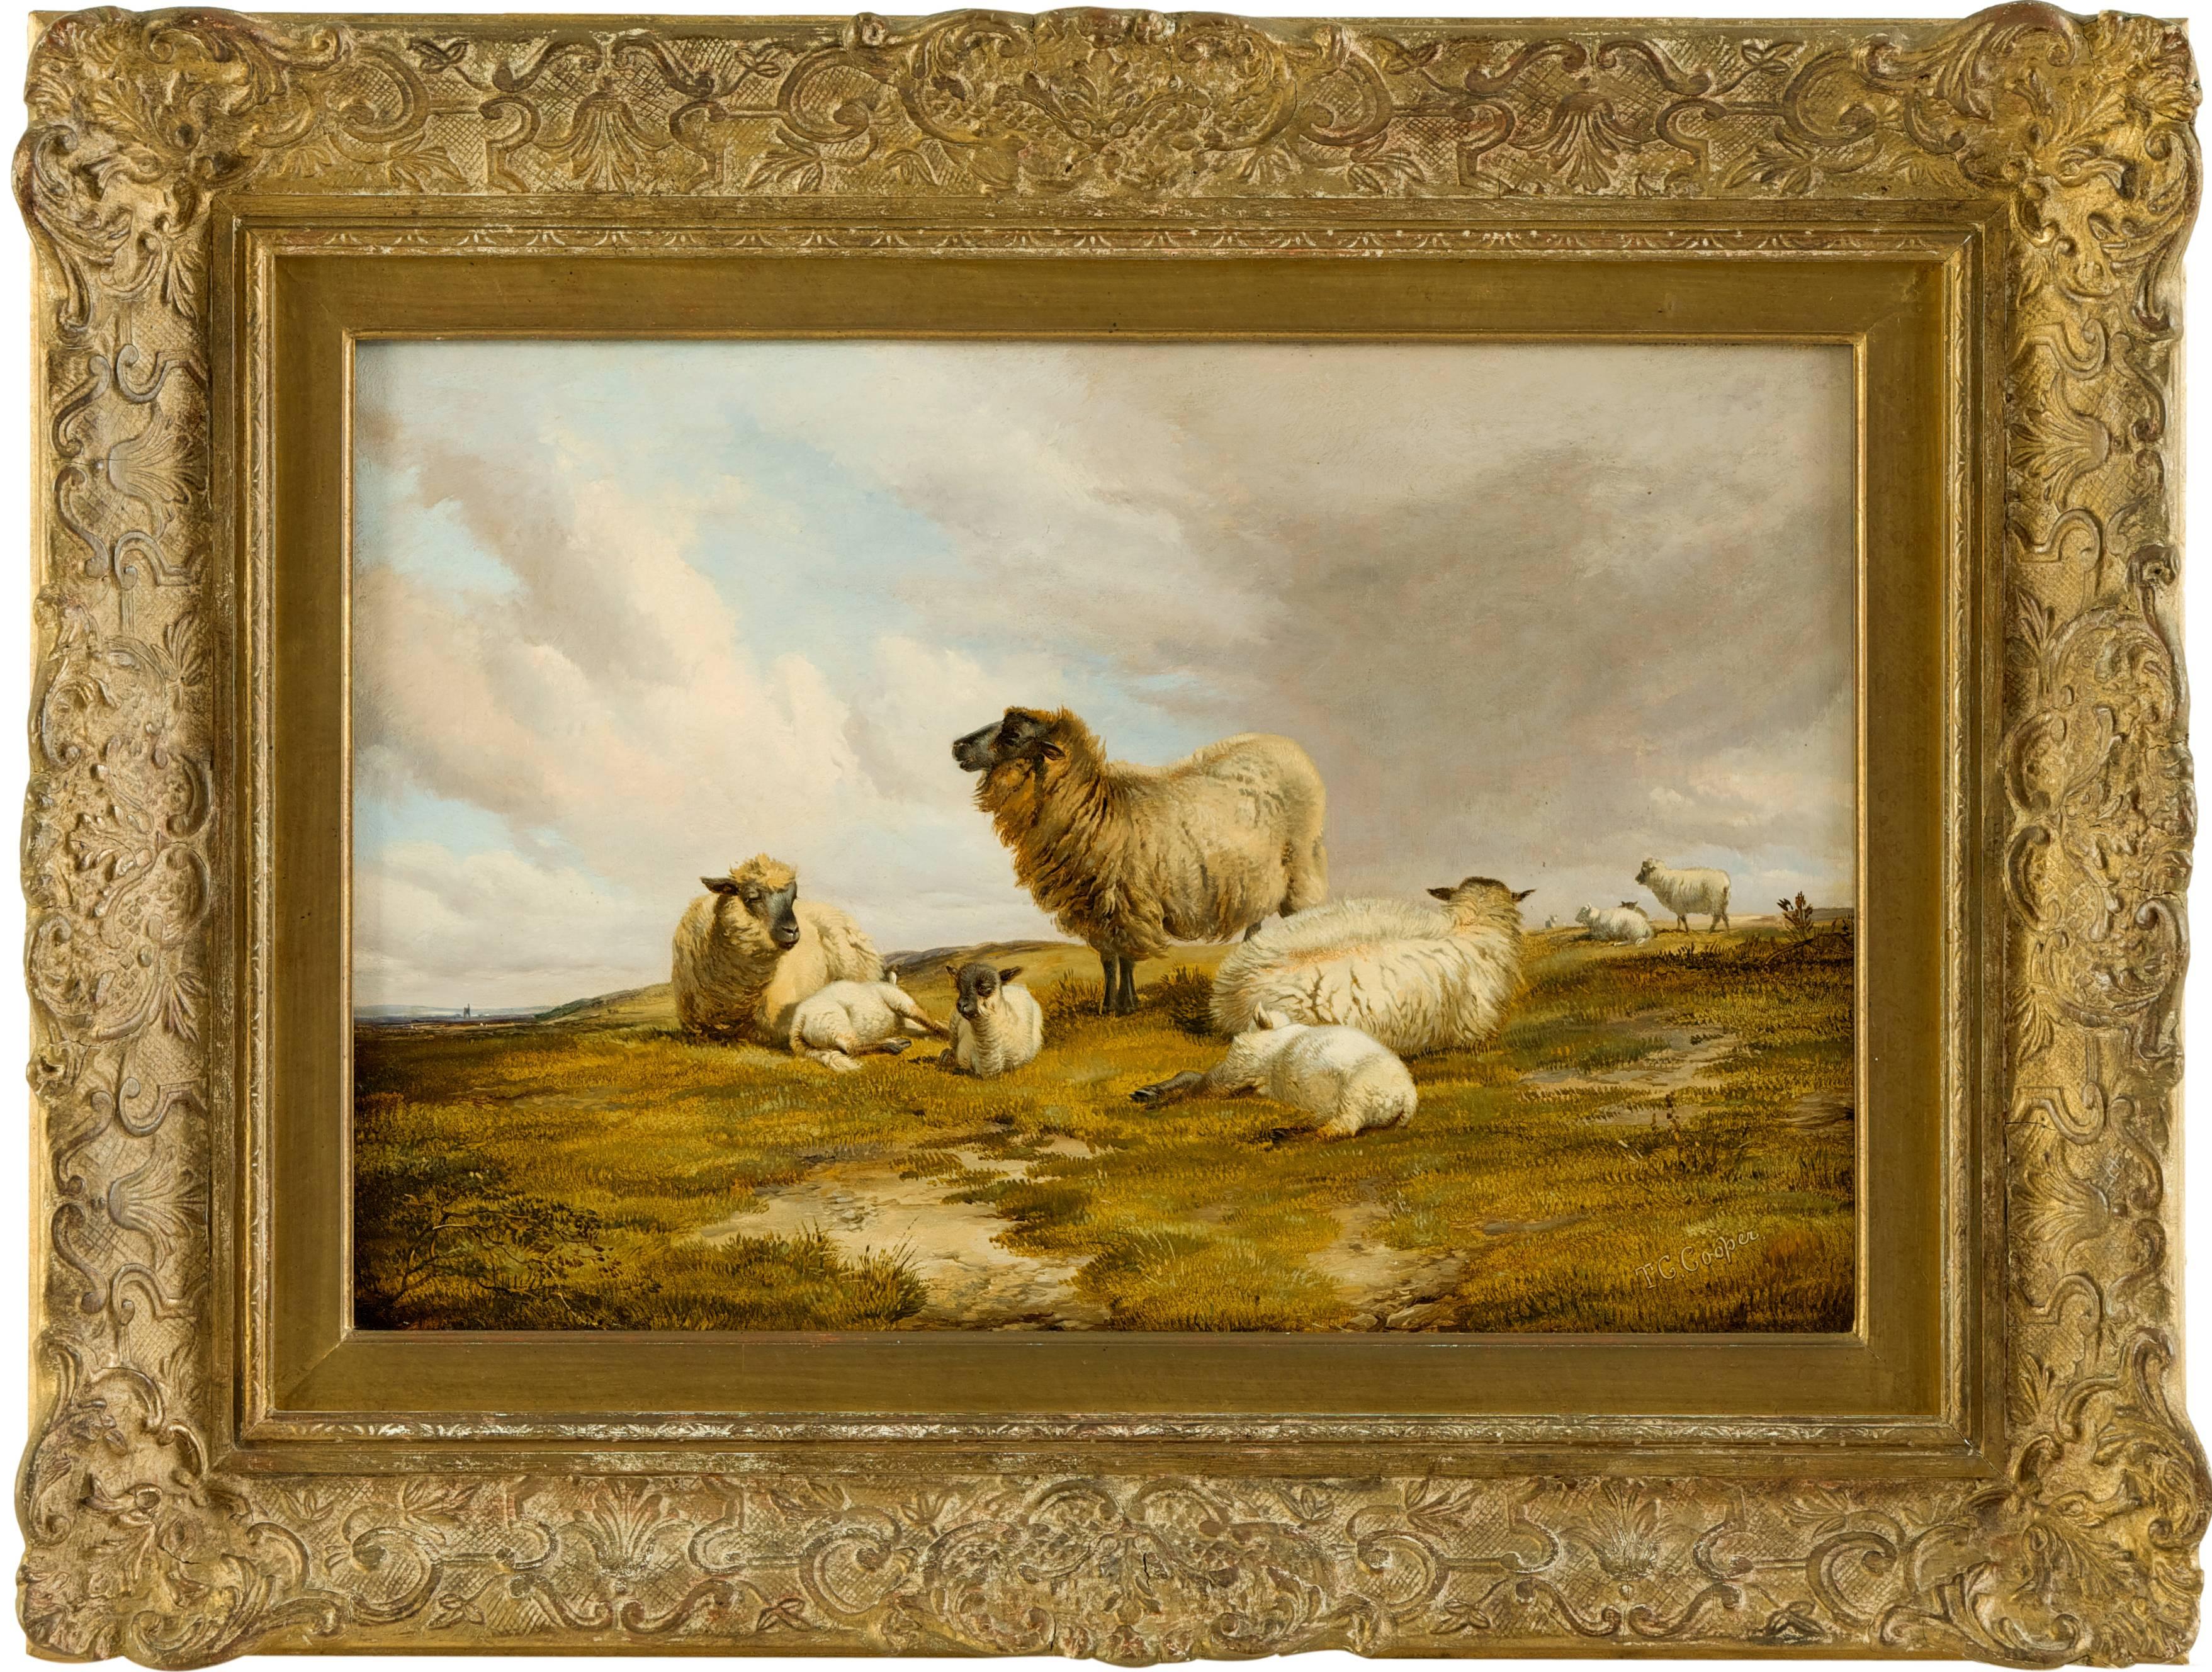 Sheep in a Landscape An English Scene Victorian 19th Century by T G Cooper  - Painting by Thomas George Cooper